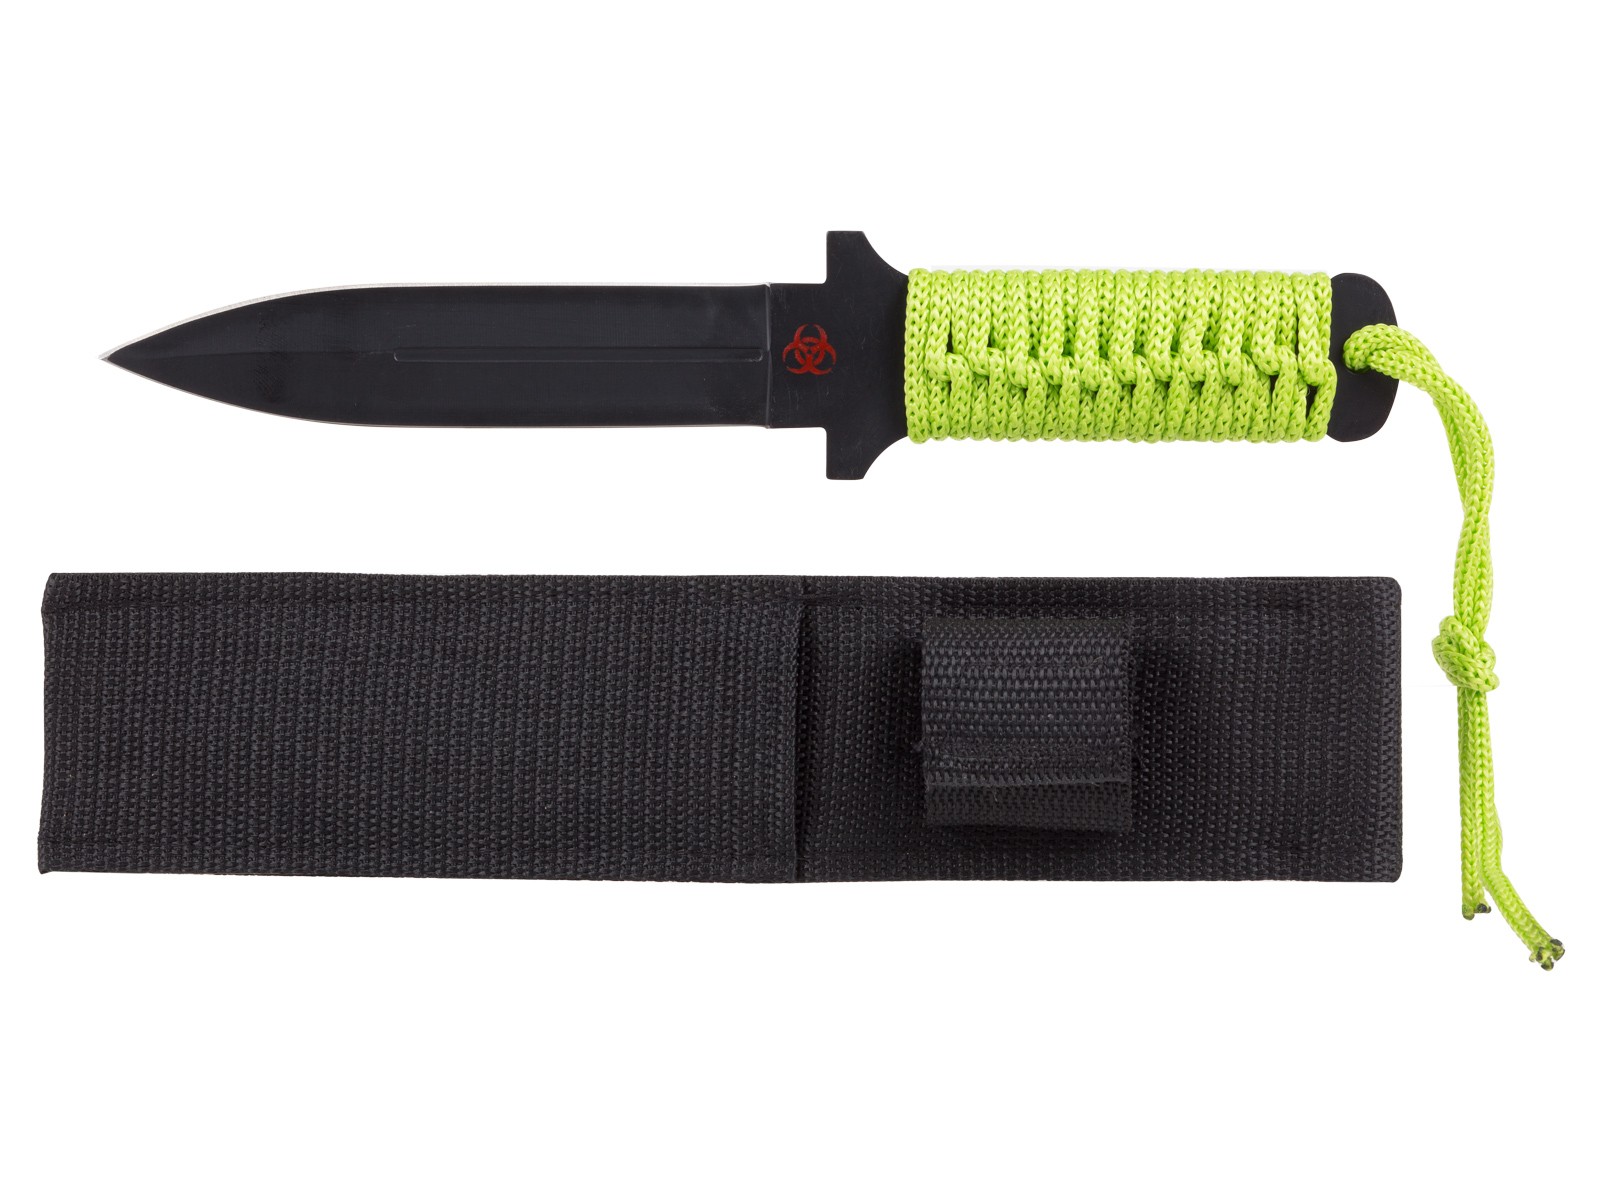 Tactical Crusader Tactical Zombie Knife, 5-1/2" Blade, Spear Point, Nylon Sheath